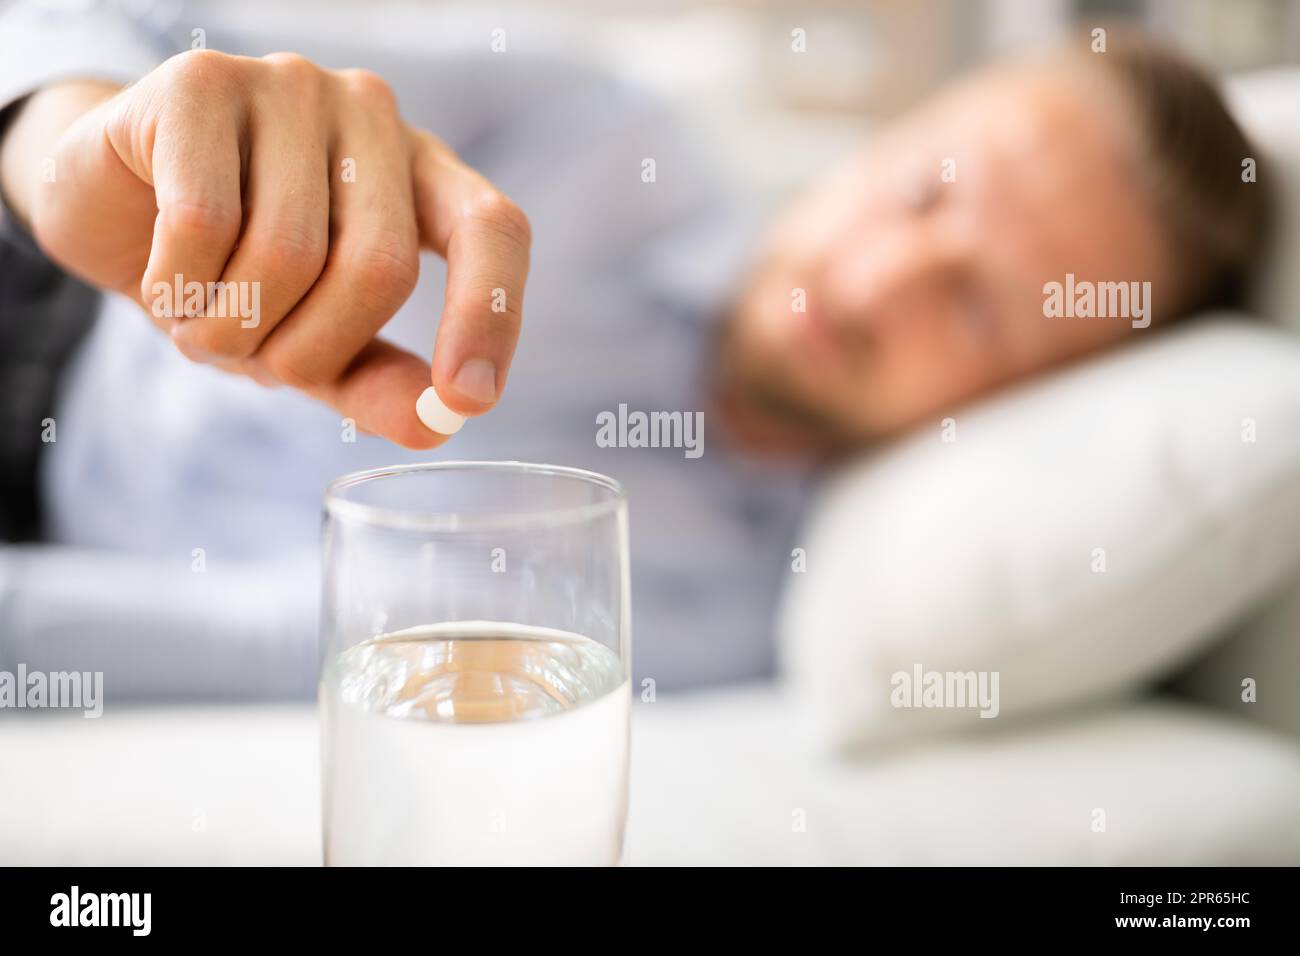 Man With Hangover Taking Medicine Pill Stock Photo